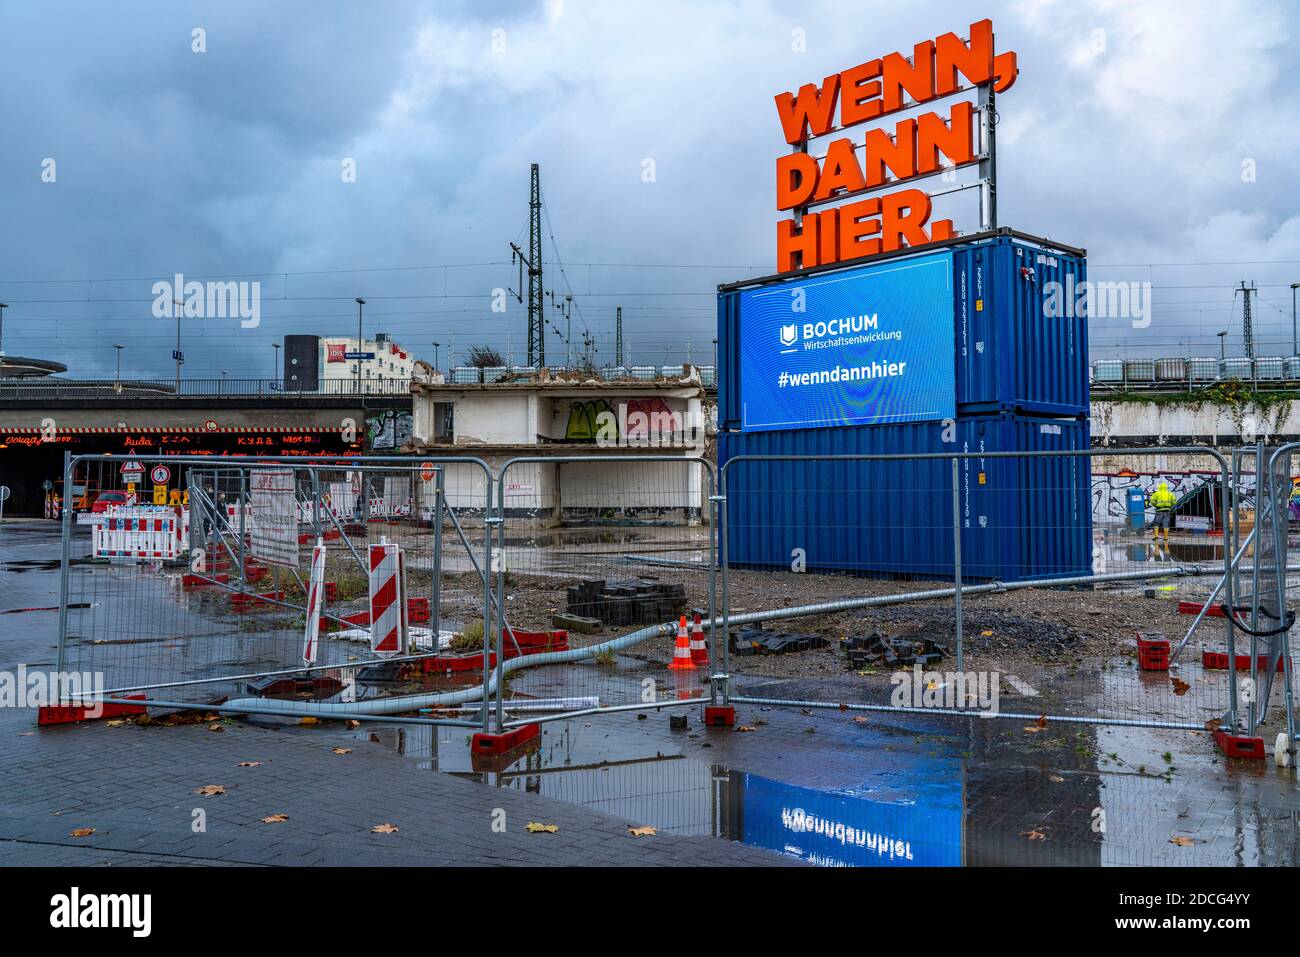 Main station ,Construction site for a new building, illuminated advertising, neon writing, digital billboard, billboard, for the Ruhr area, city adver Stock Photo